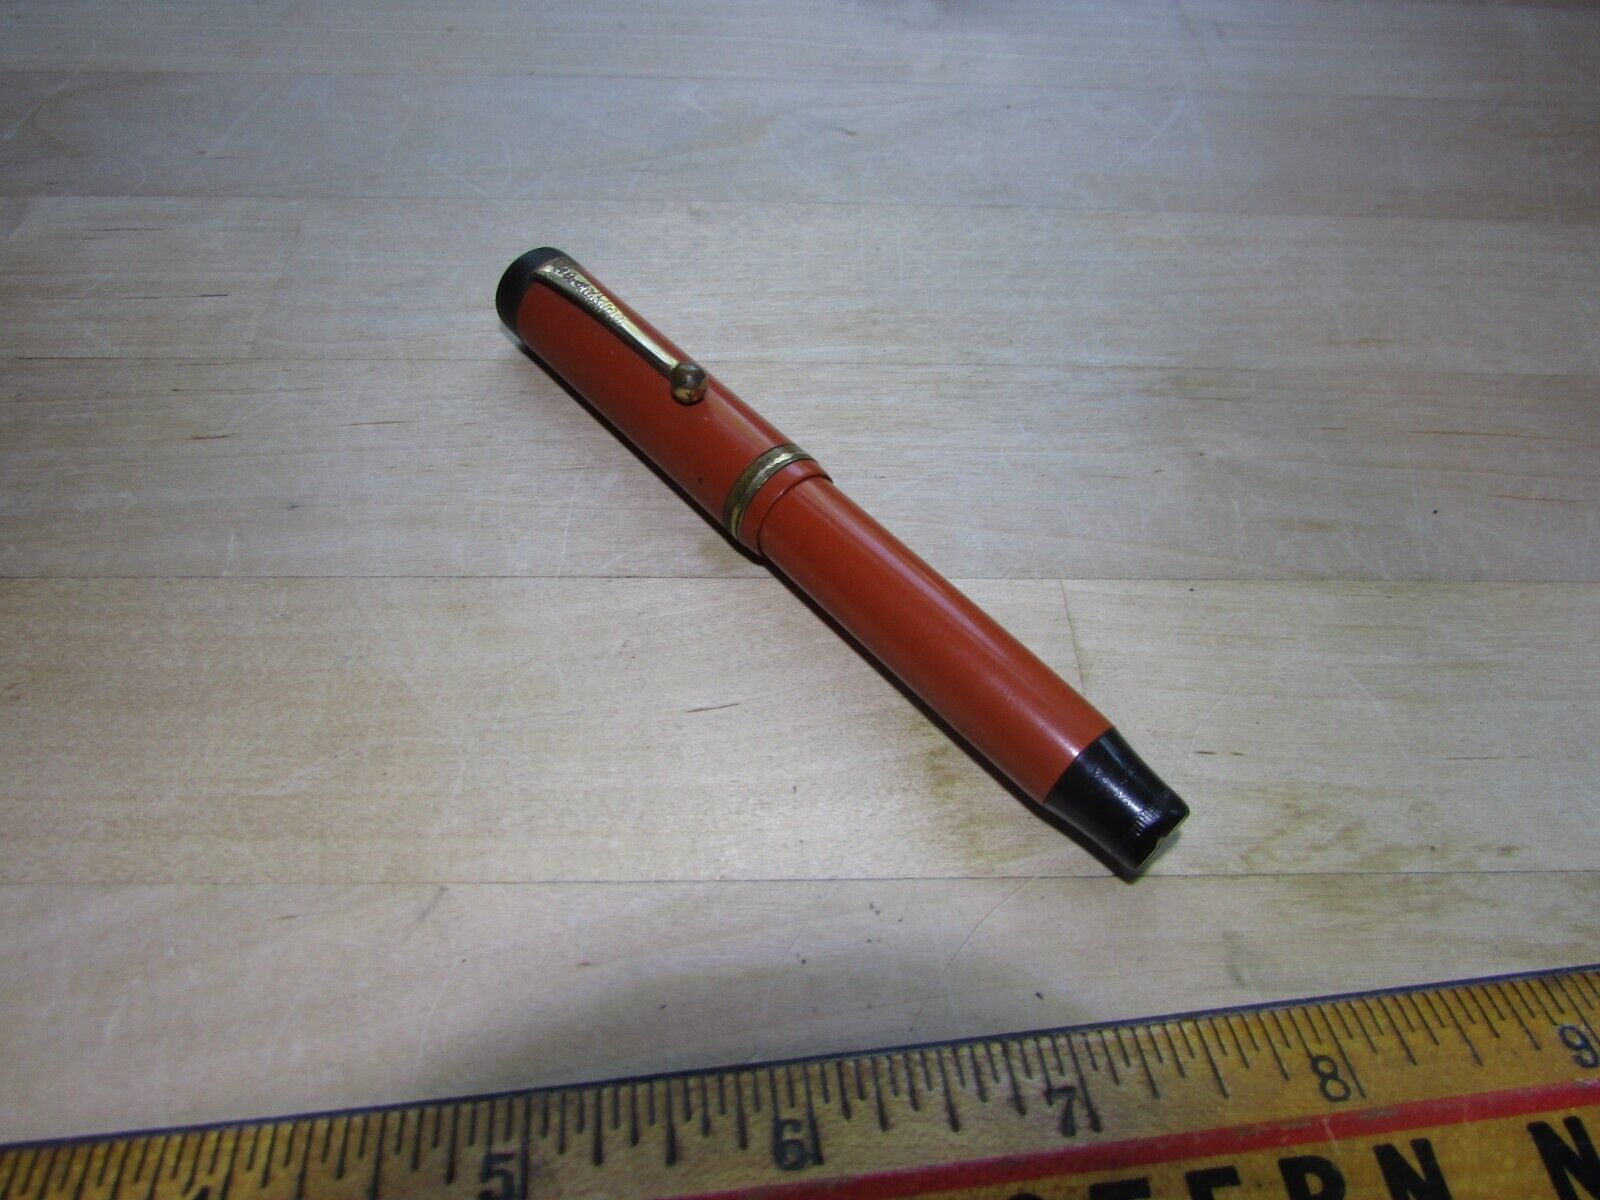 PARKER DUOFOLD JR « LUCKY CURVE » FOUNTAIN PEN ORANGE MADE IN JAINSVILLE WISC.